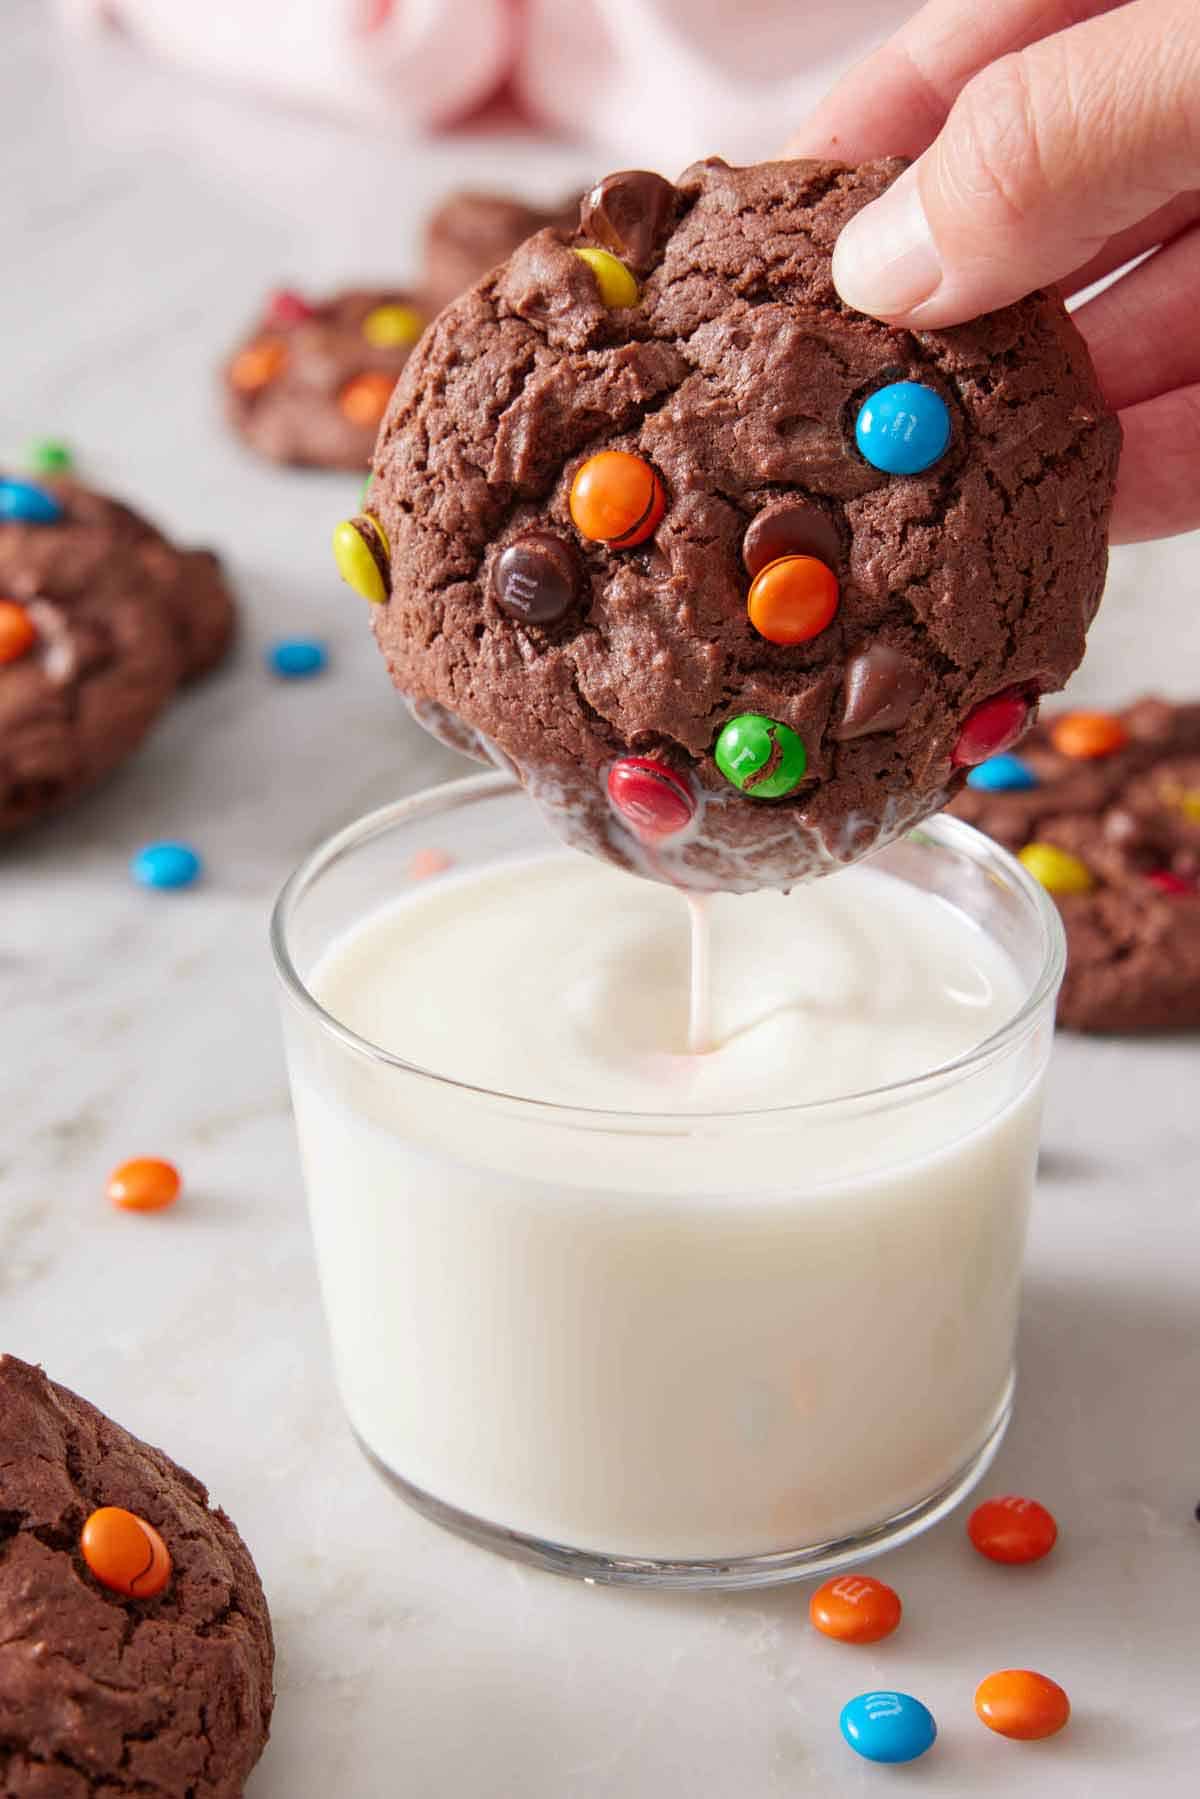 A cake mix cookie with M&M's dipped into a glass of milk and lifted.